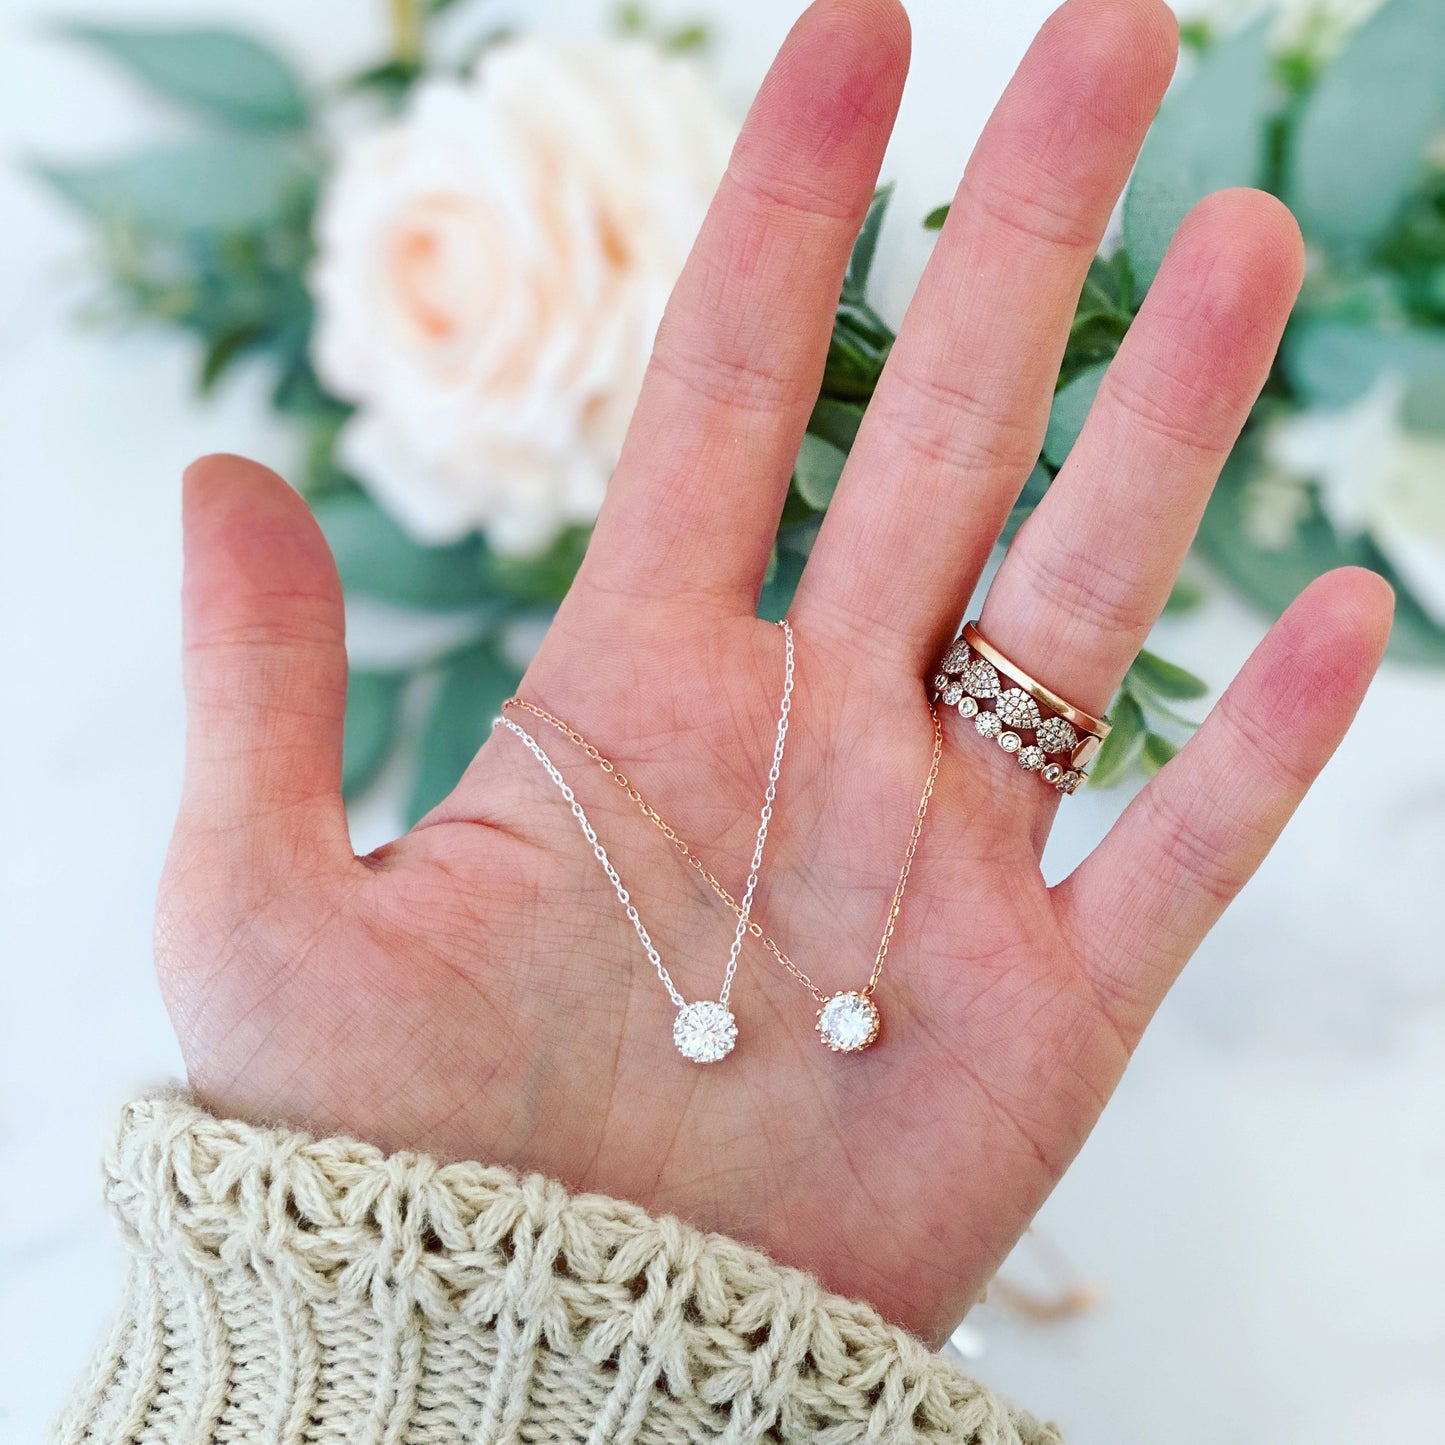 Can't Say "I Do" Without You! Dainty Necklaces